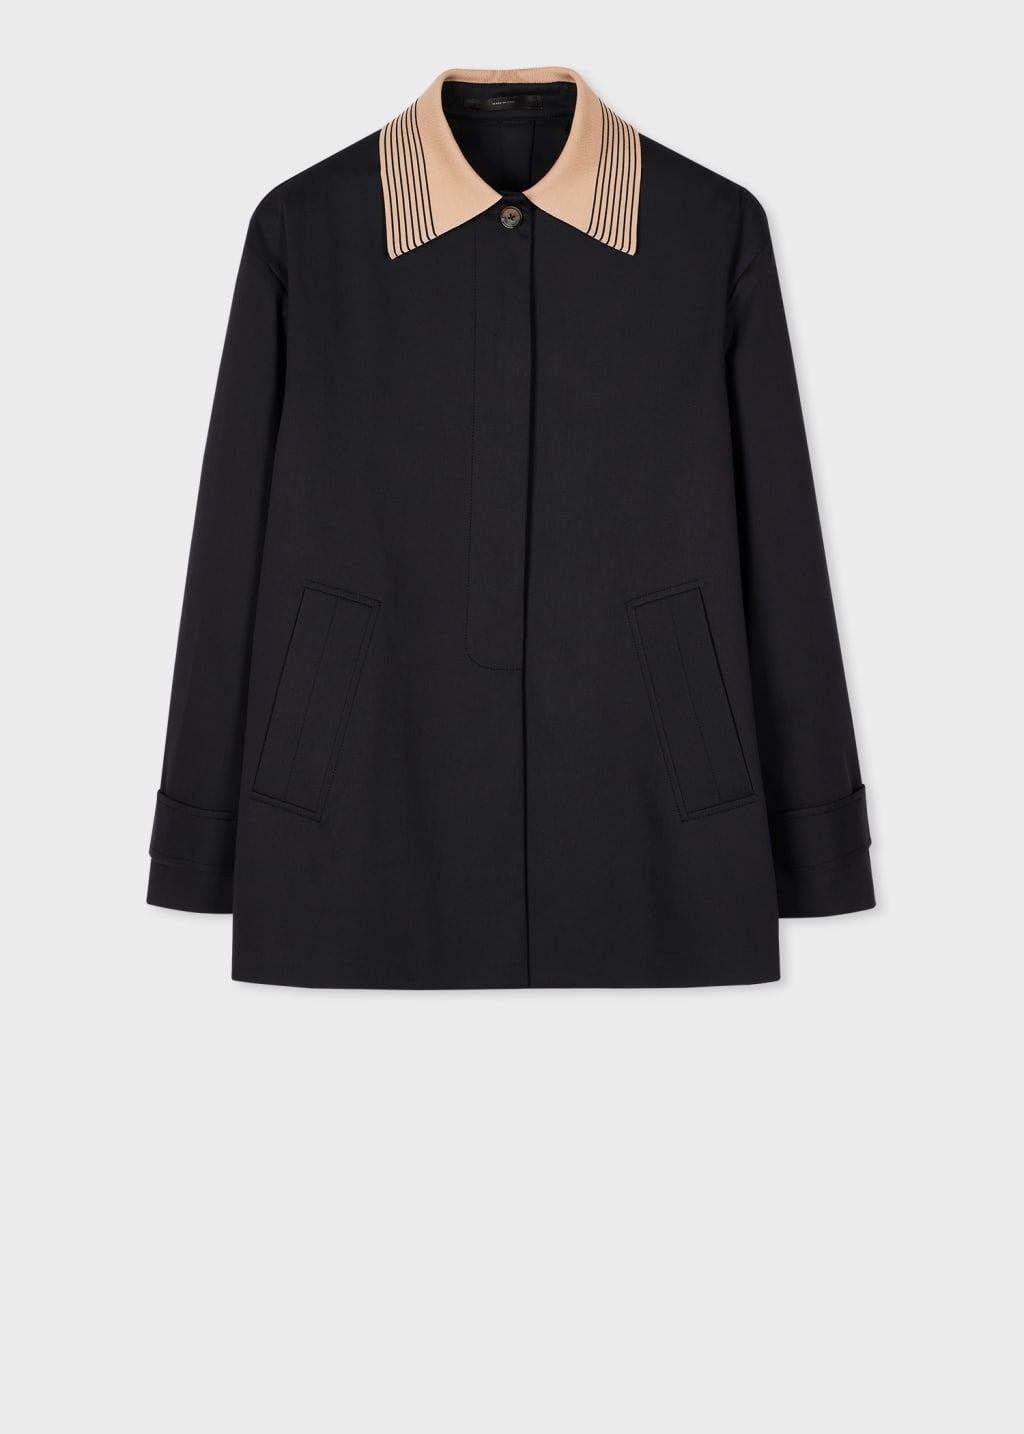 Front View - Women's Cotton Contrast Collar Swing Jacket Paul Smith